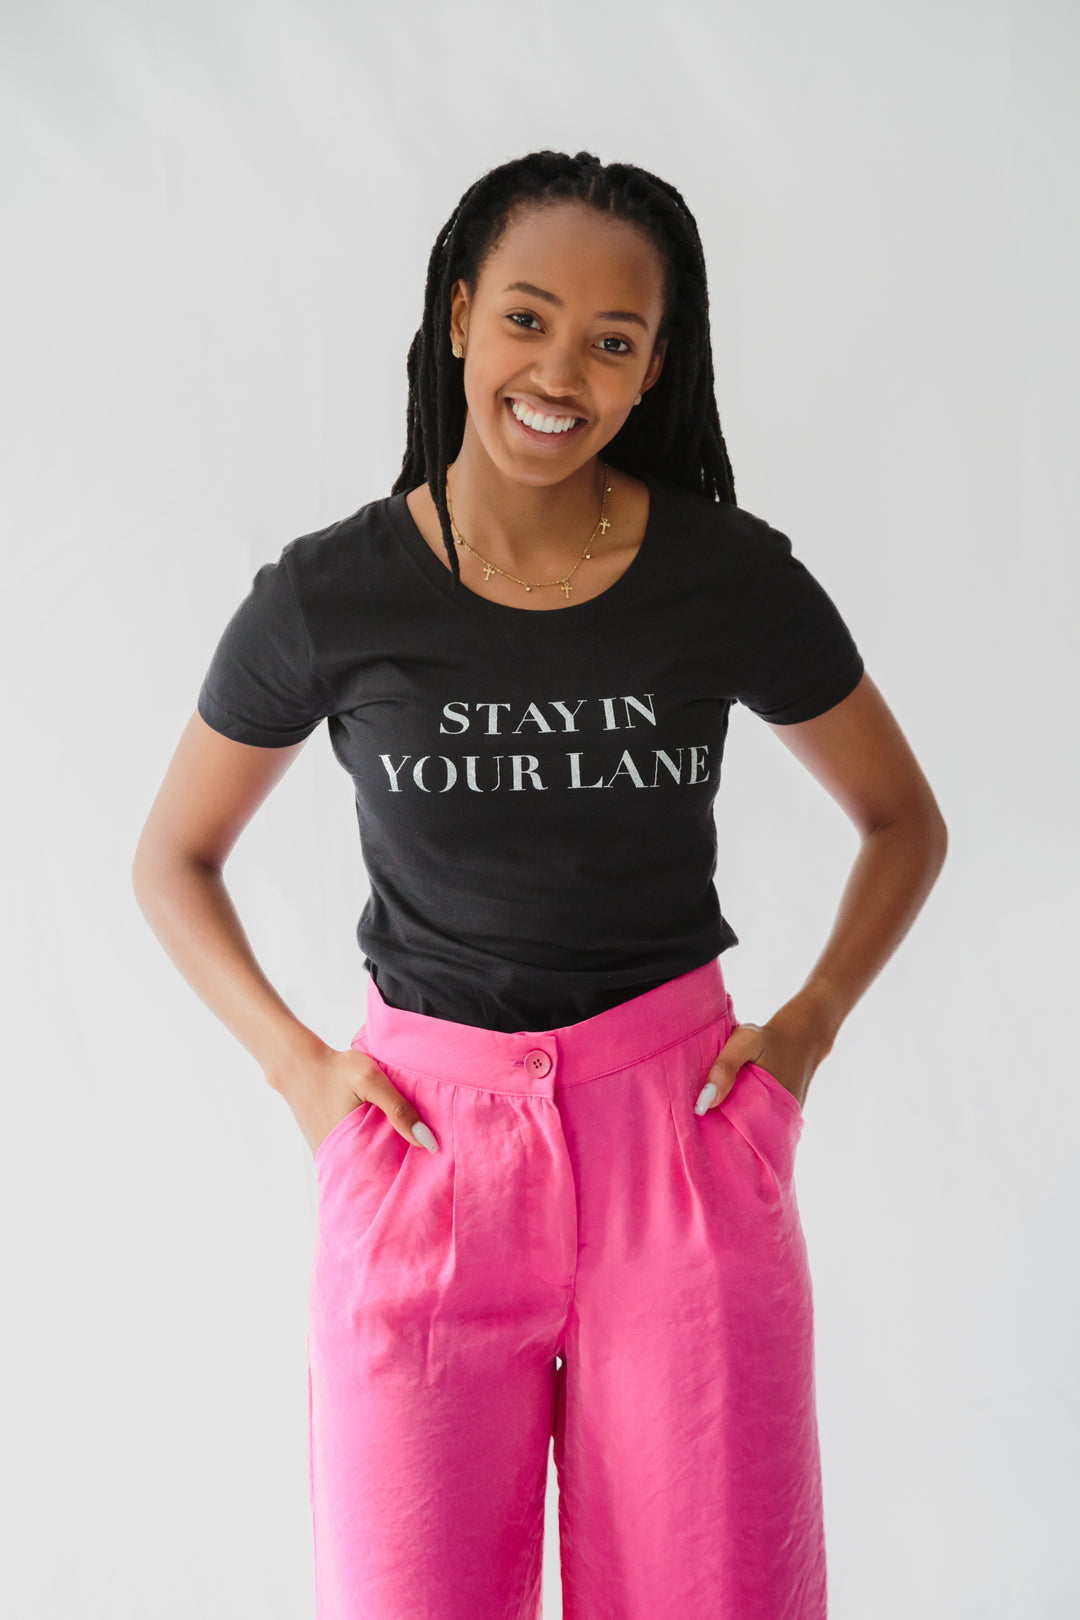 Stay In Your Lane Tee Black/Silver Glitter-TOPS-kindacollection-Kinda